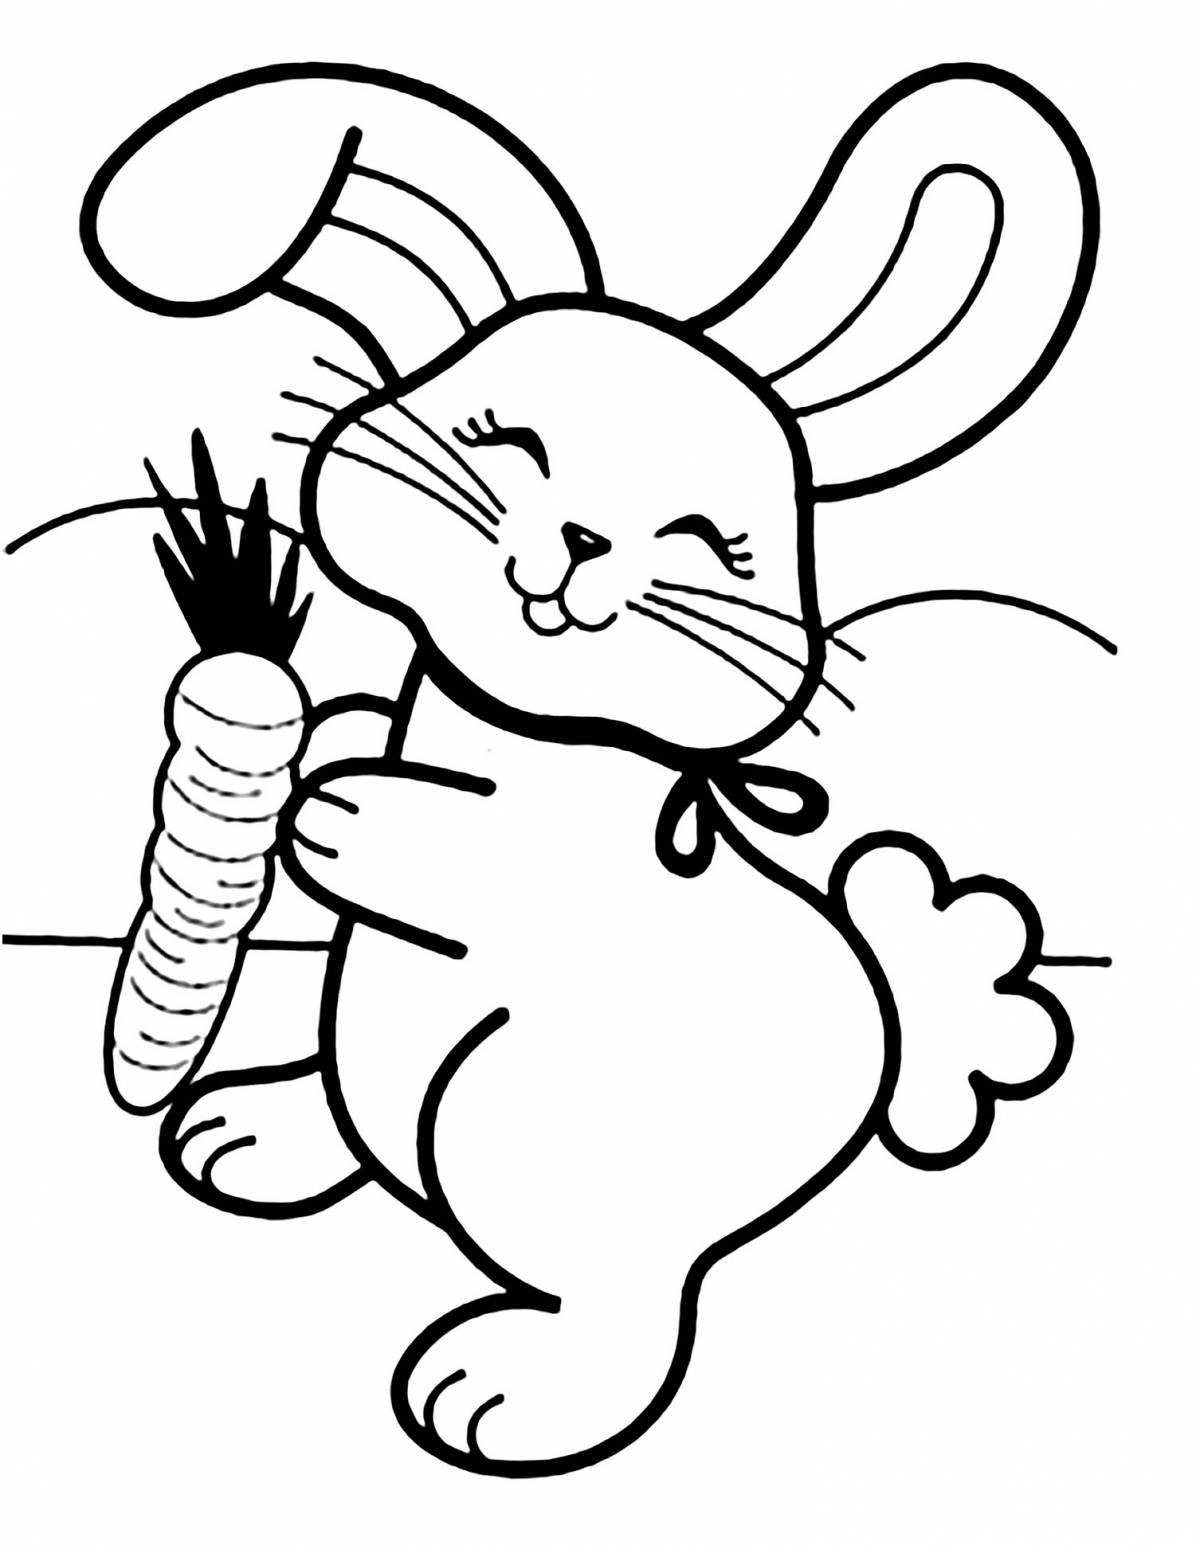 Naughty Carrot Rabbit Coloring Page